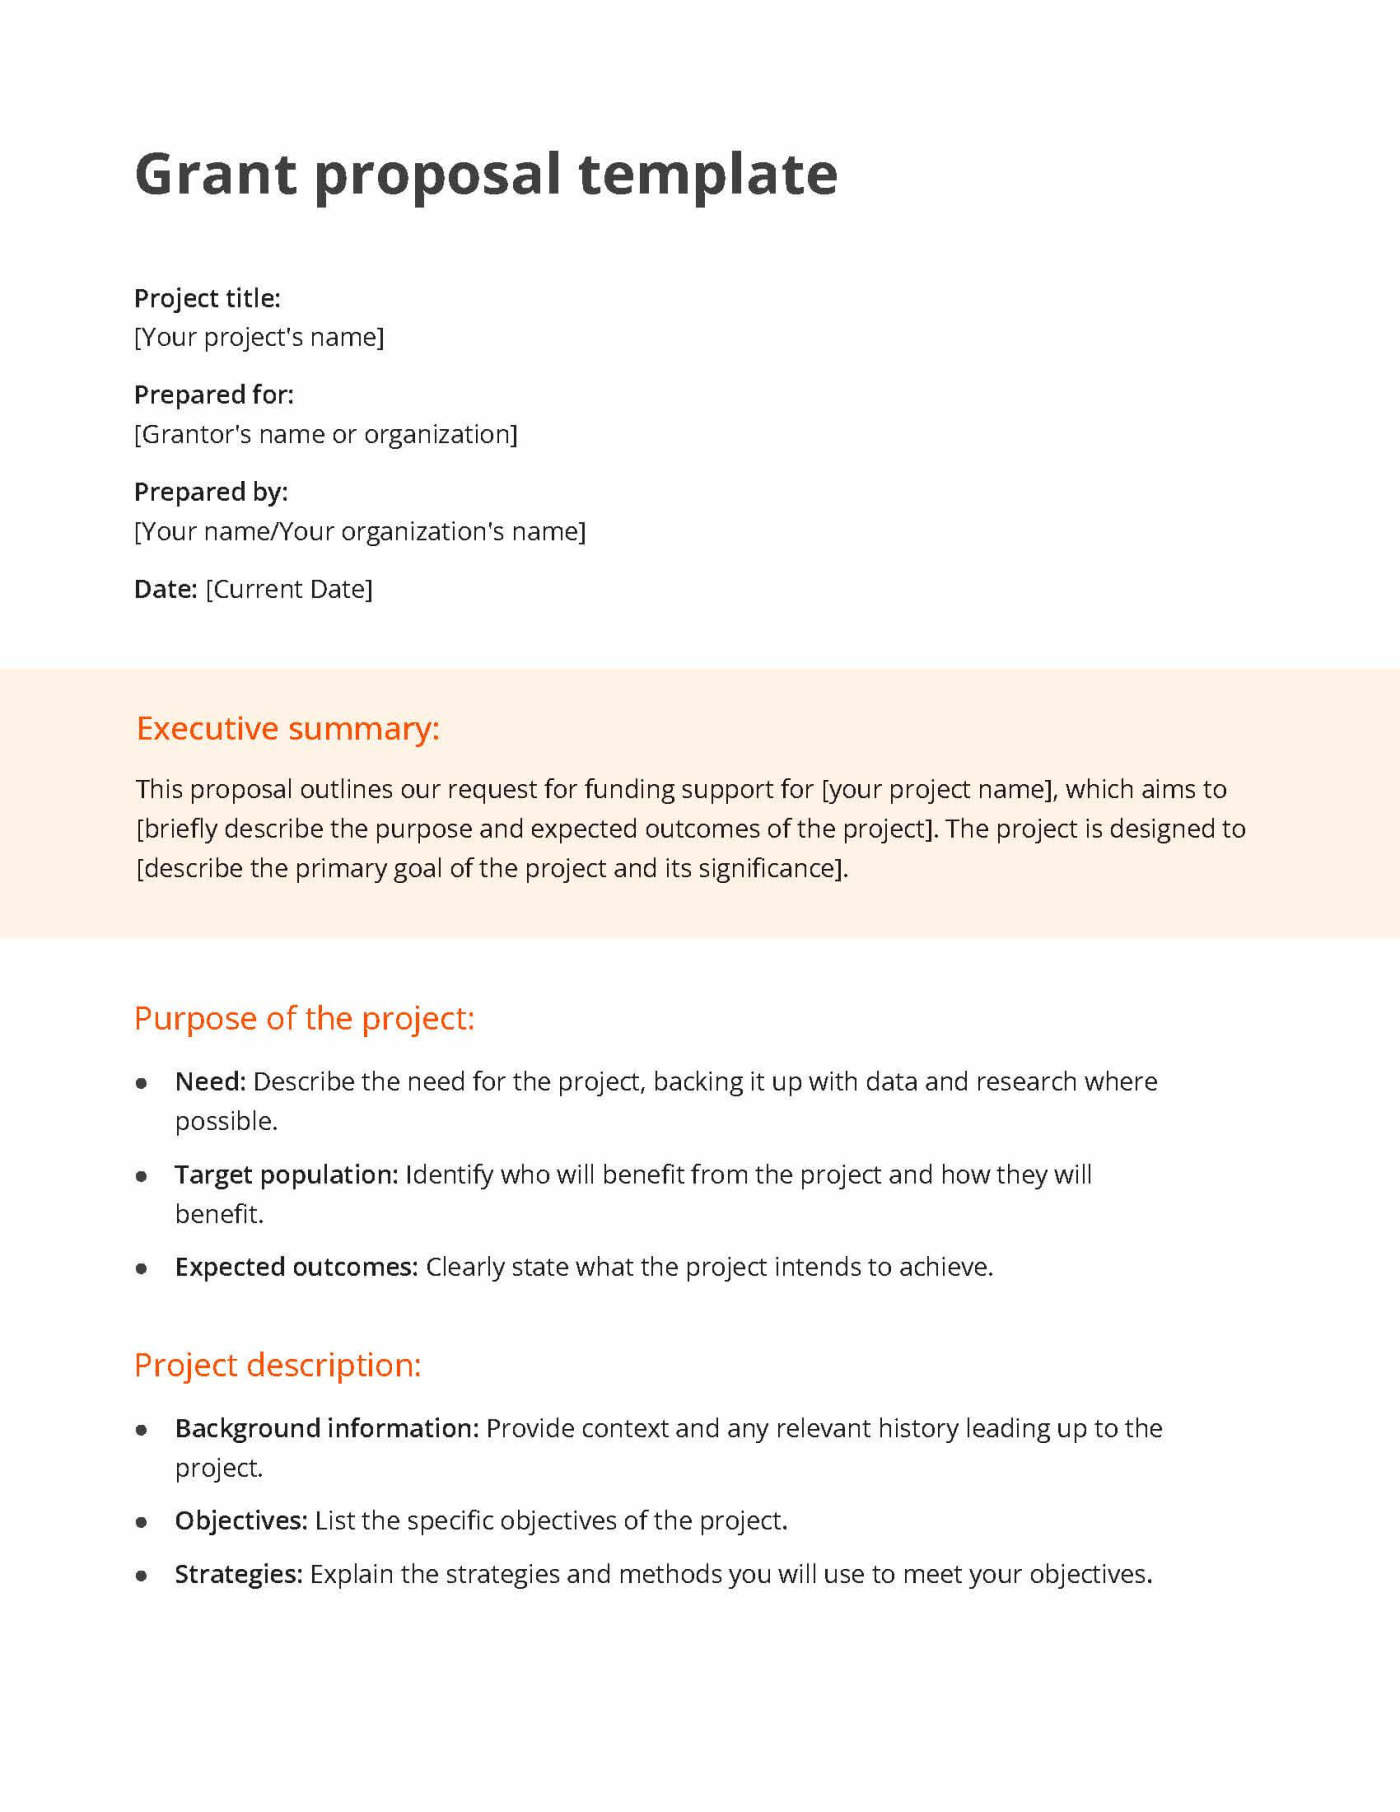 White and orange grant proposal template including a section for the executive summary, purpose of the project and project description